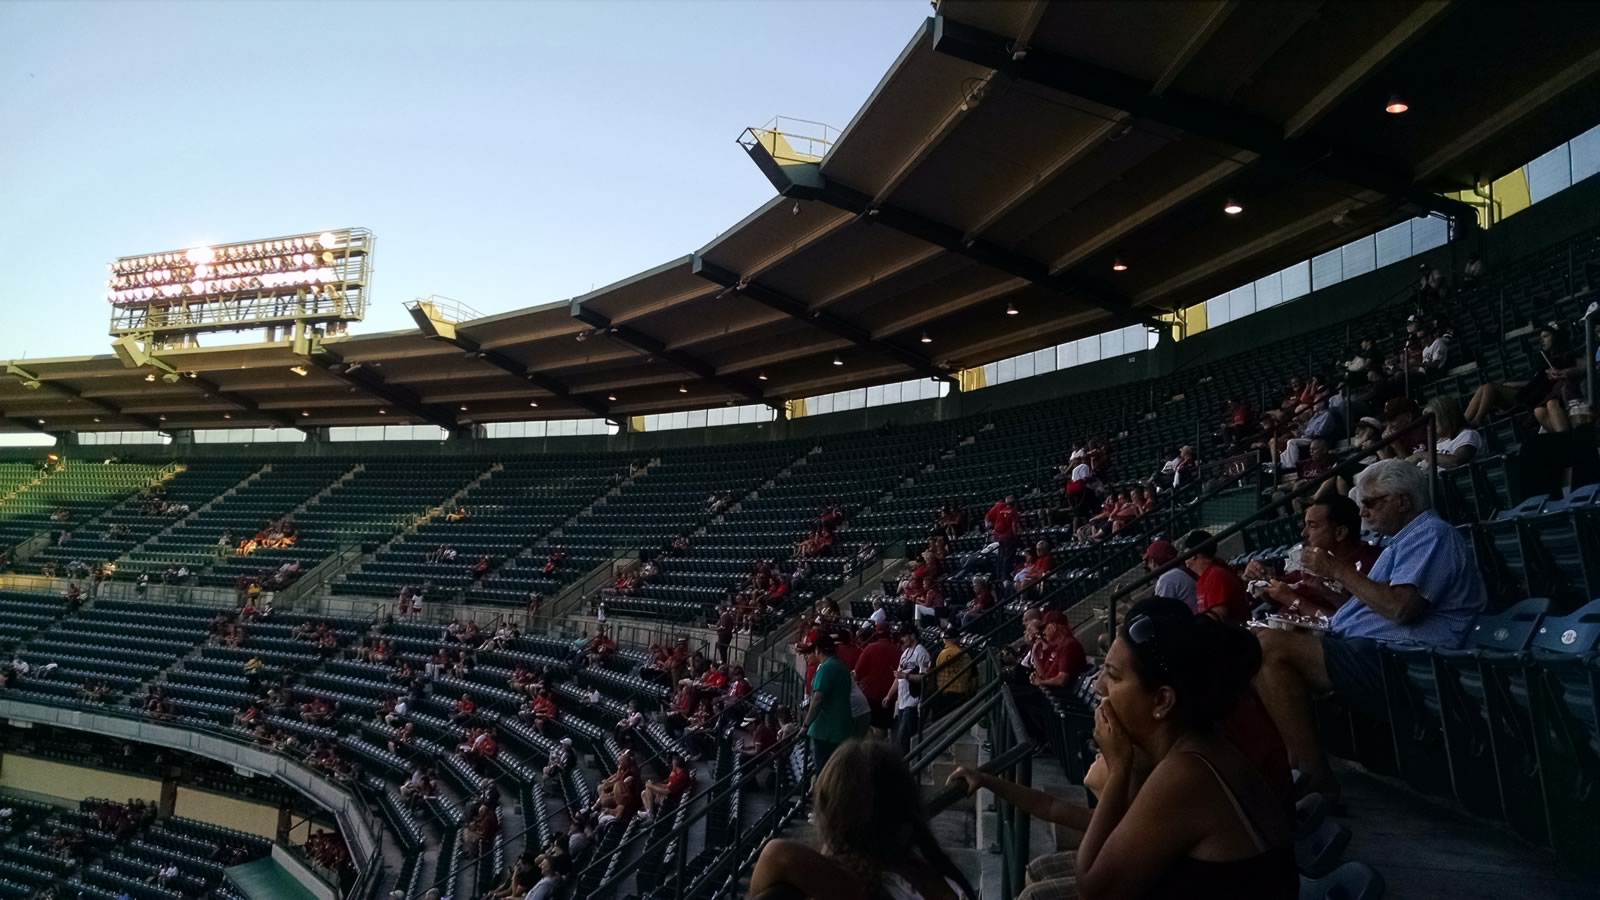 Shaded Seats at Angel Stadium - Find Angels Tickets in the Shade